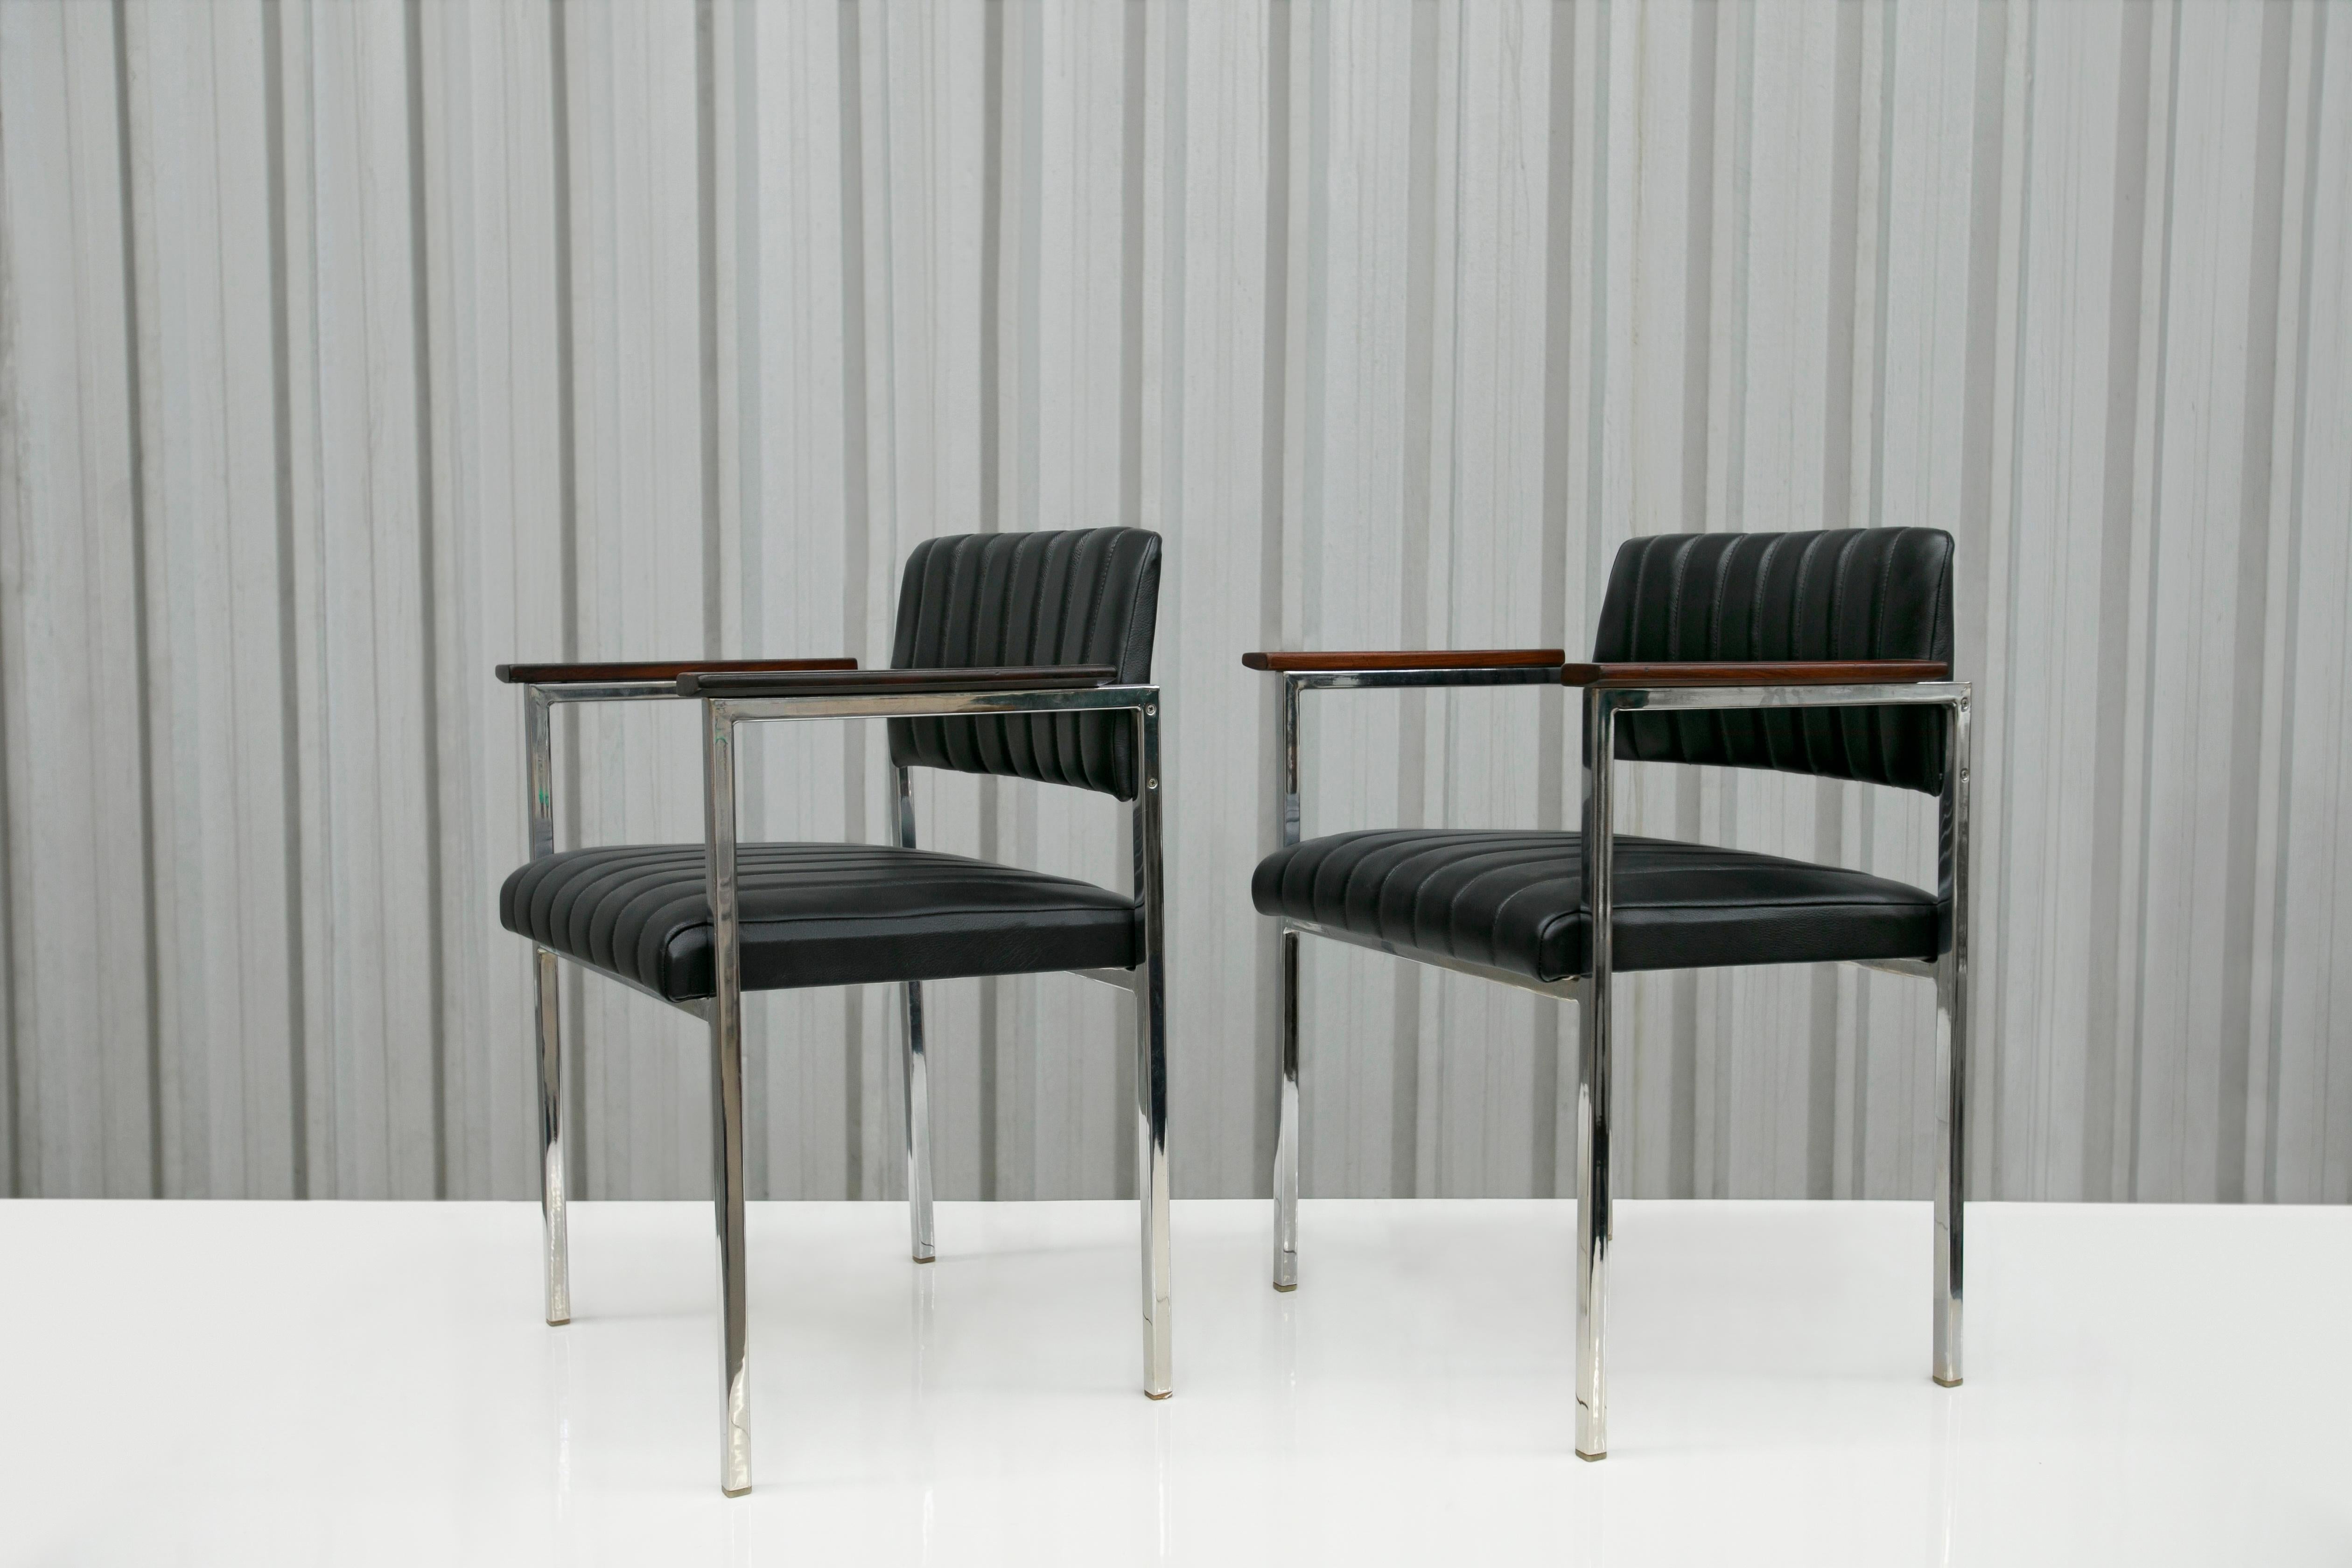 20th Century Brazilian Modern Armchairs in Steel, Leather & Wood Unknown, 1960s, Brazil For Sale